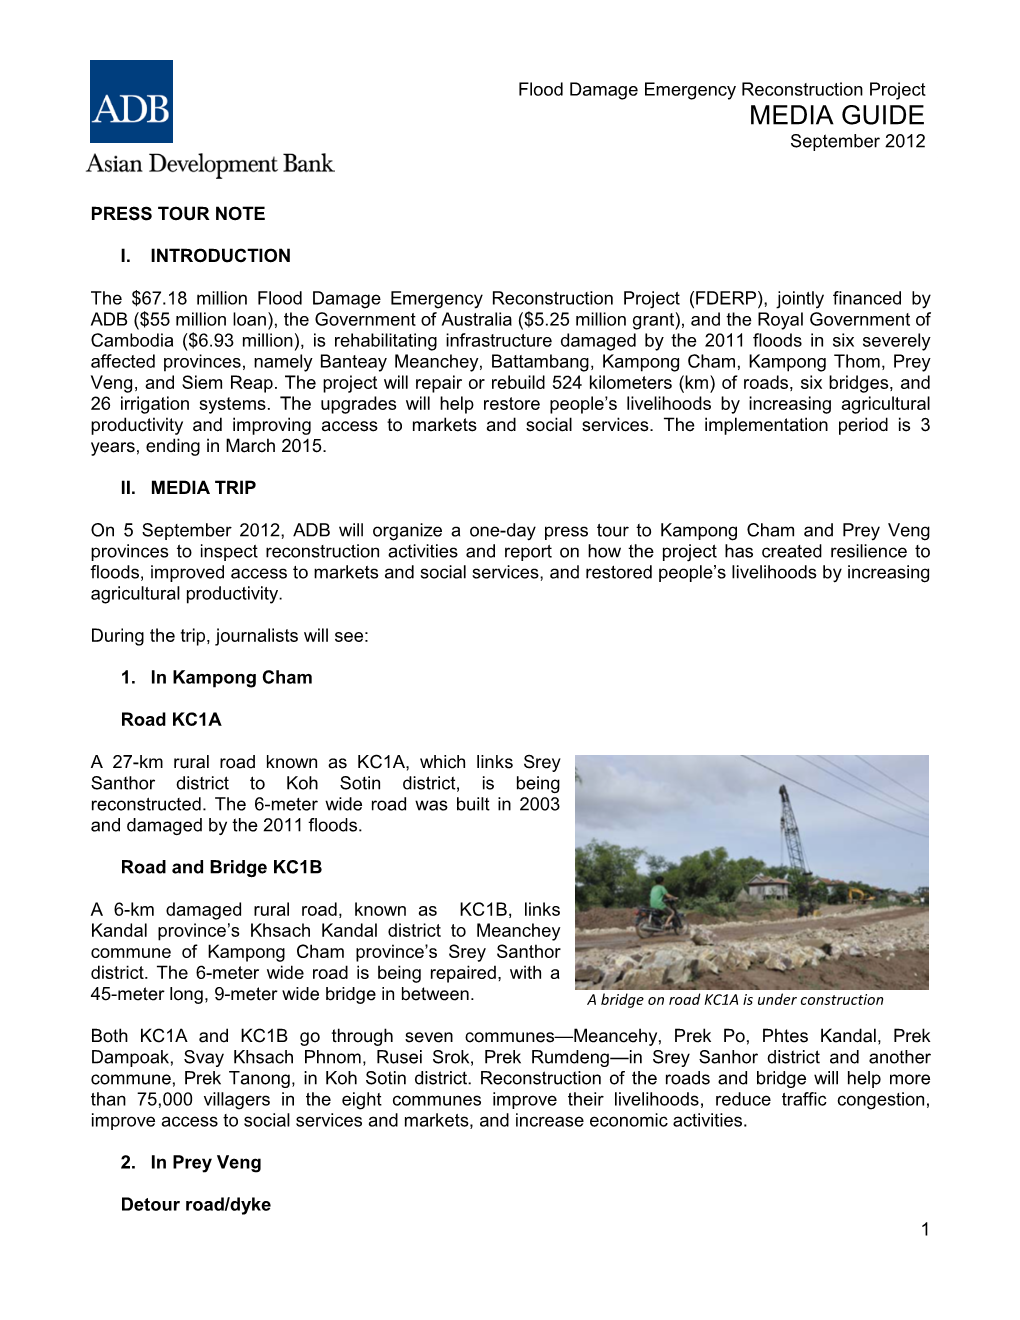 Media Guide: Flood Damage Emergency Reconstruction Project